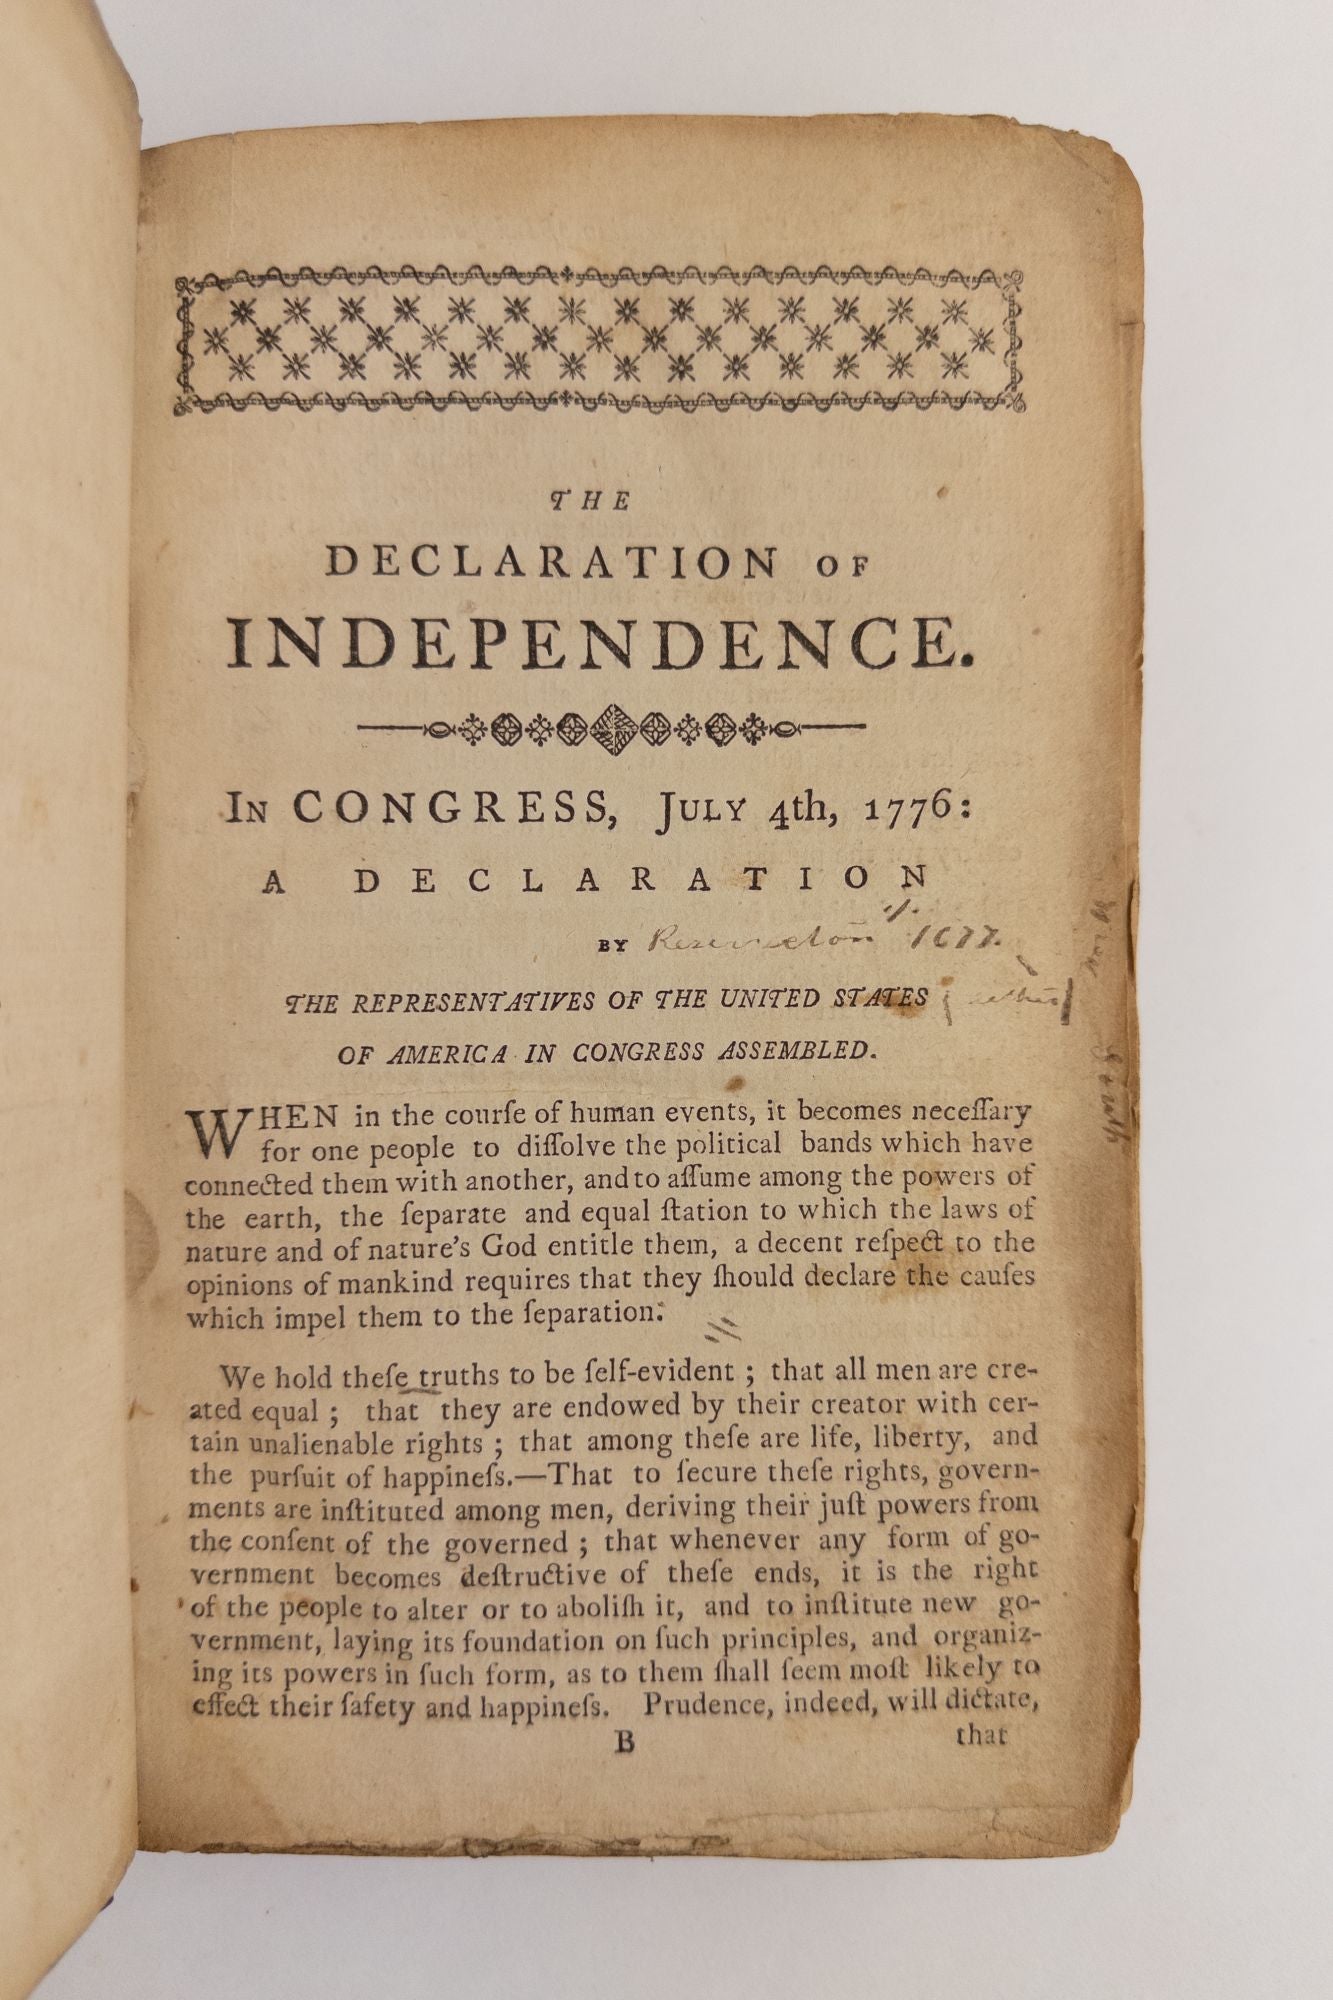 Product Image for THE LAWS OF THE STATE OF NEW-HAMPSHIRE, TOGETHER WITH THE DECLARATION OF INDEPENDENCE..